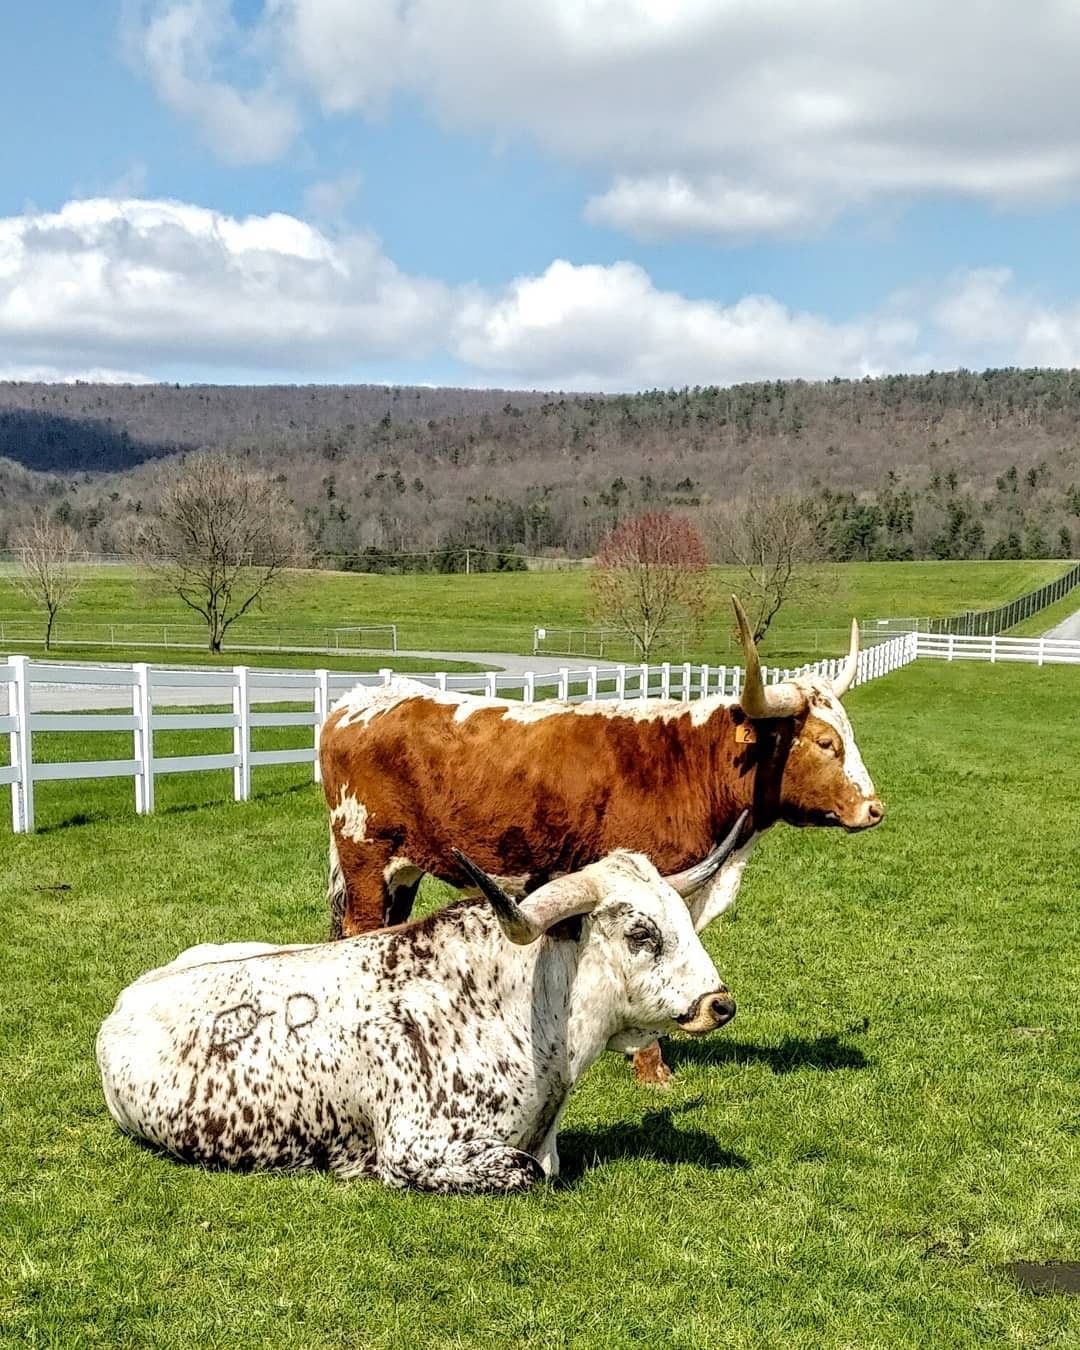 The Texas longhorn cattle at Happy Valley Agventure member Penn's Cave are looking forward to the reopening ☀⁣
⁣
